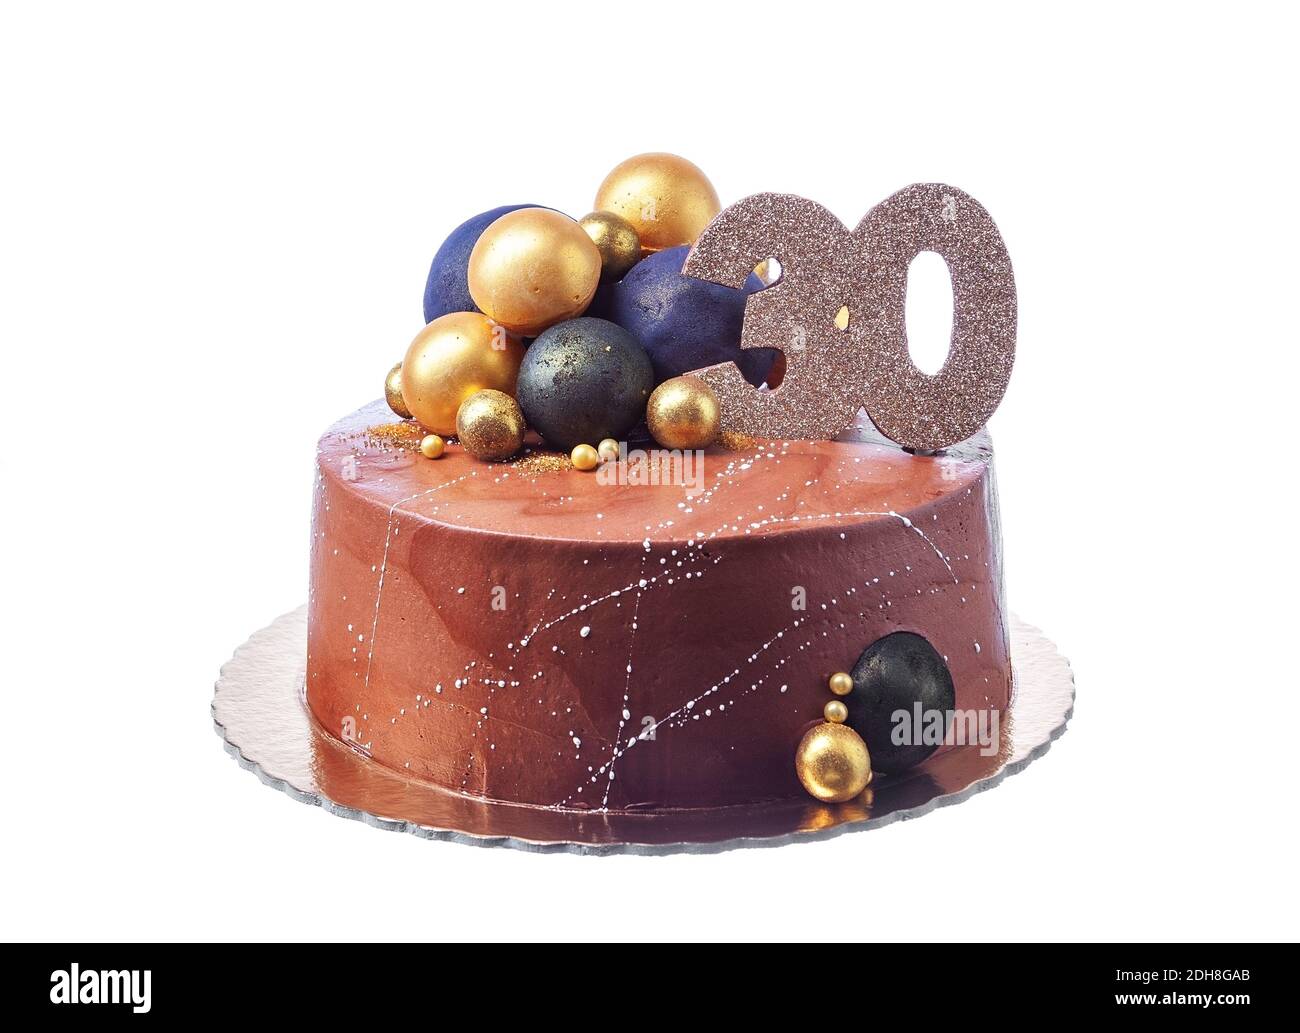 An original conceptual chocolate cake with round ball decorations ...